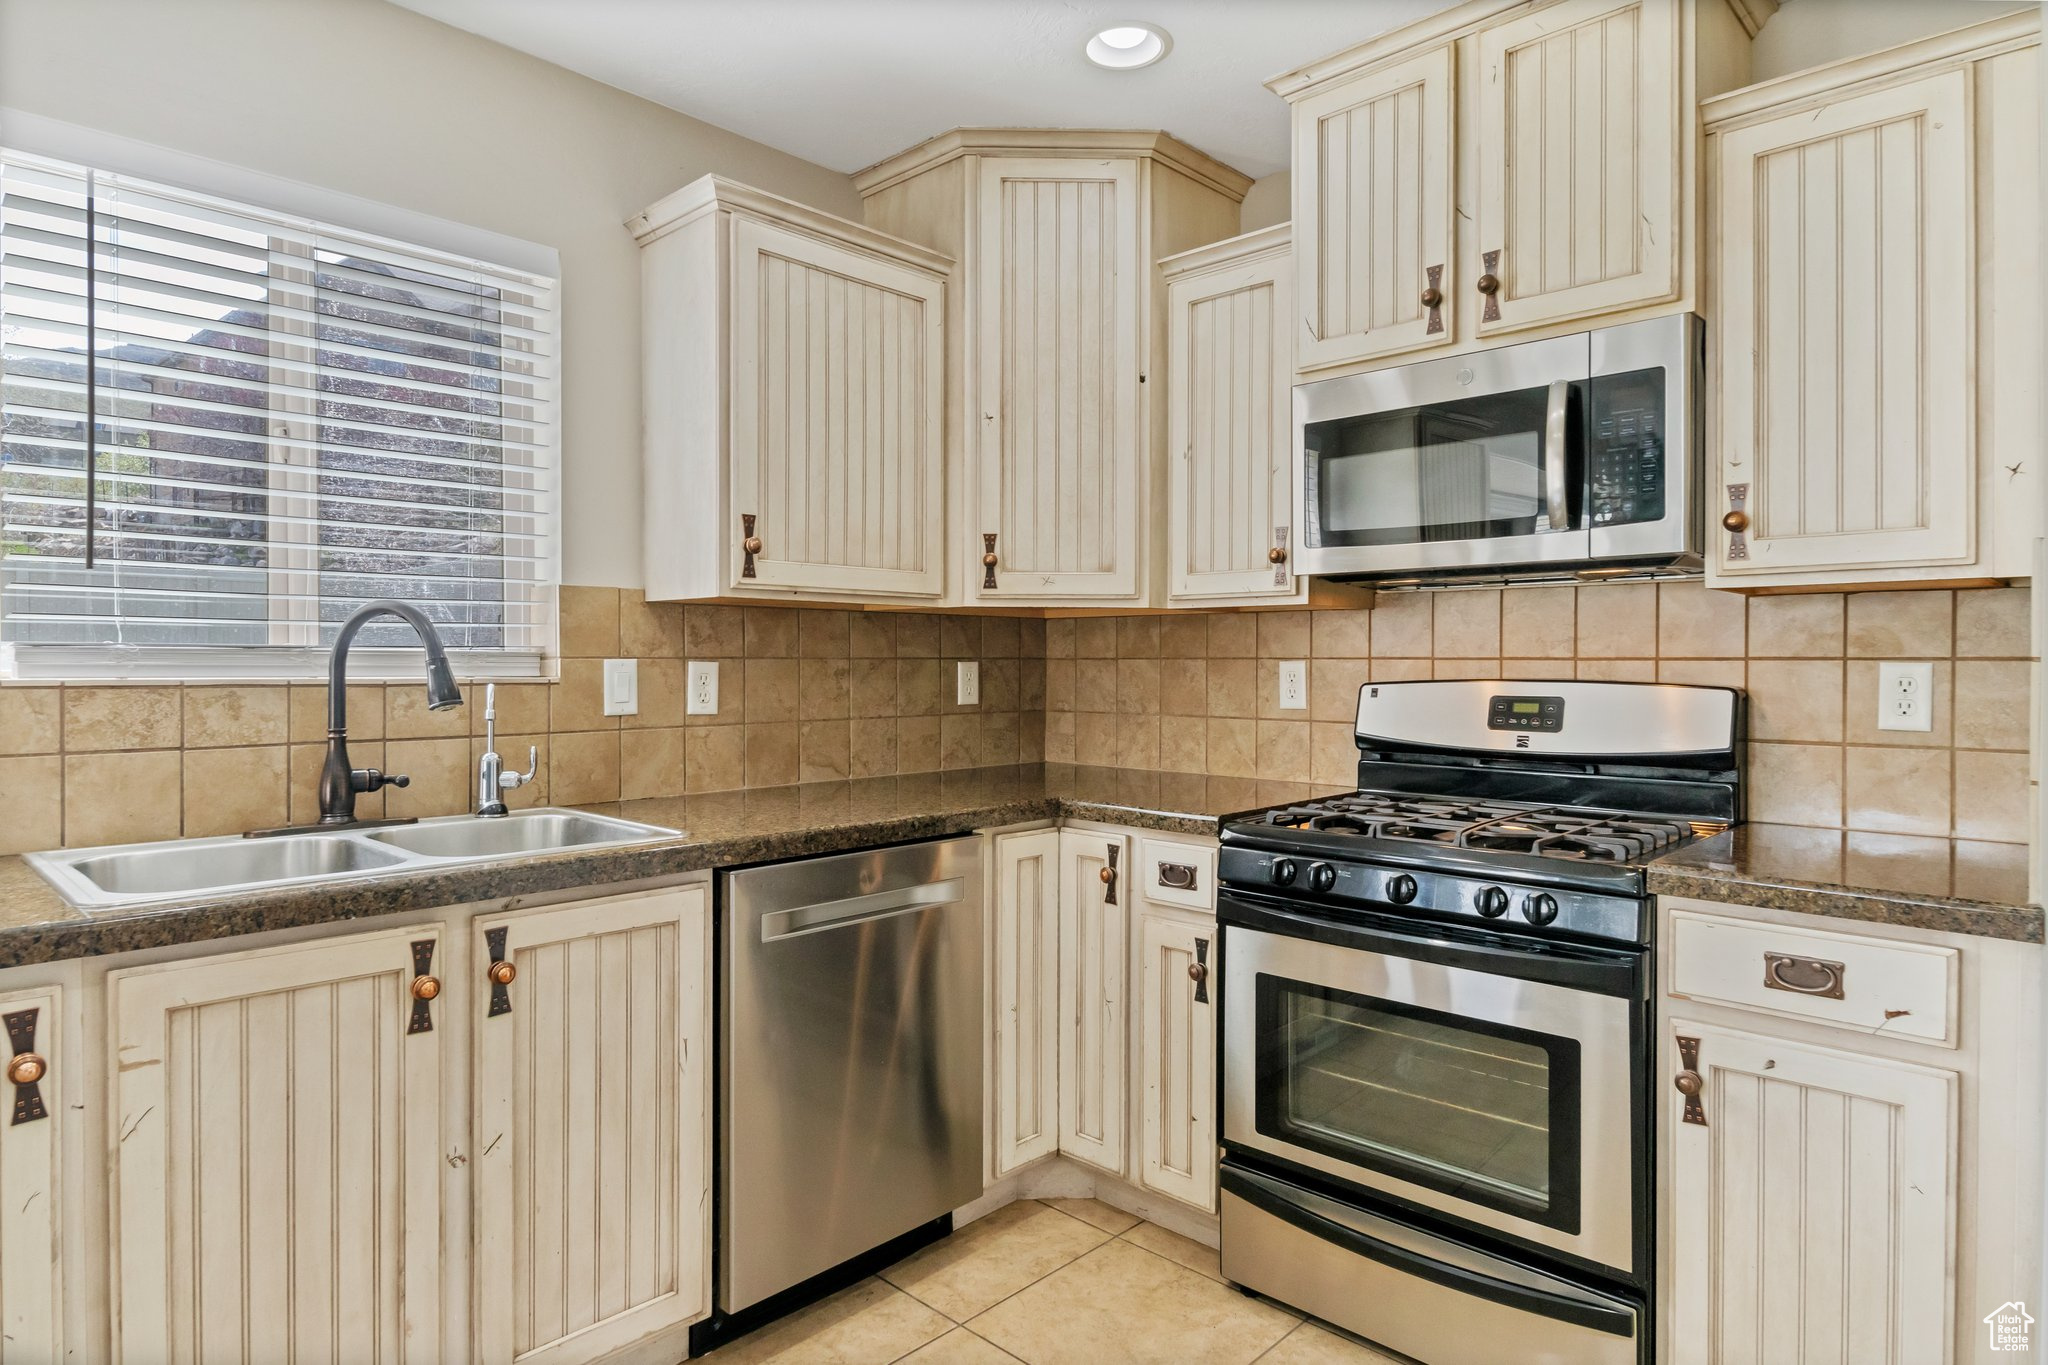 Kitchen featuring sink, appliances with stainless steel finishes, backsplash, and light tile floors